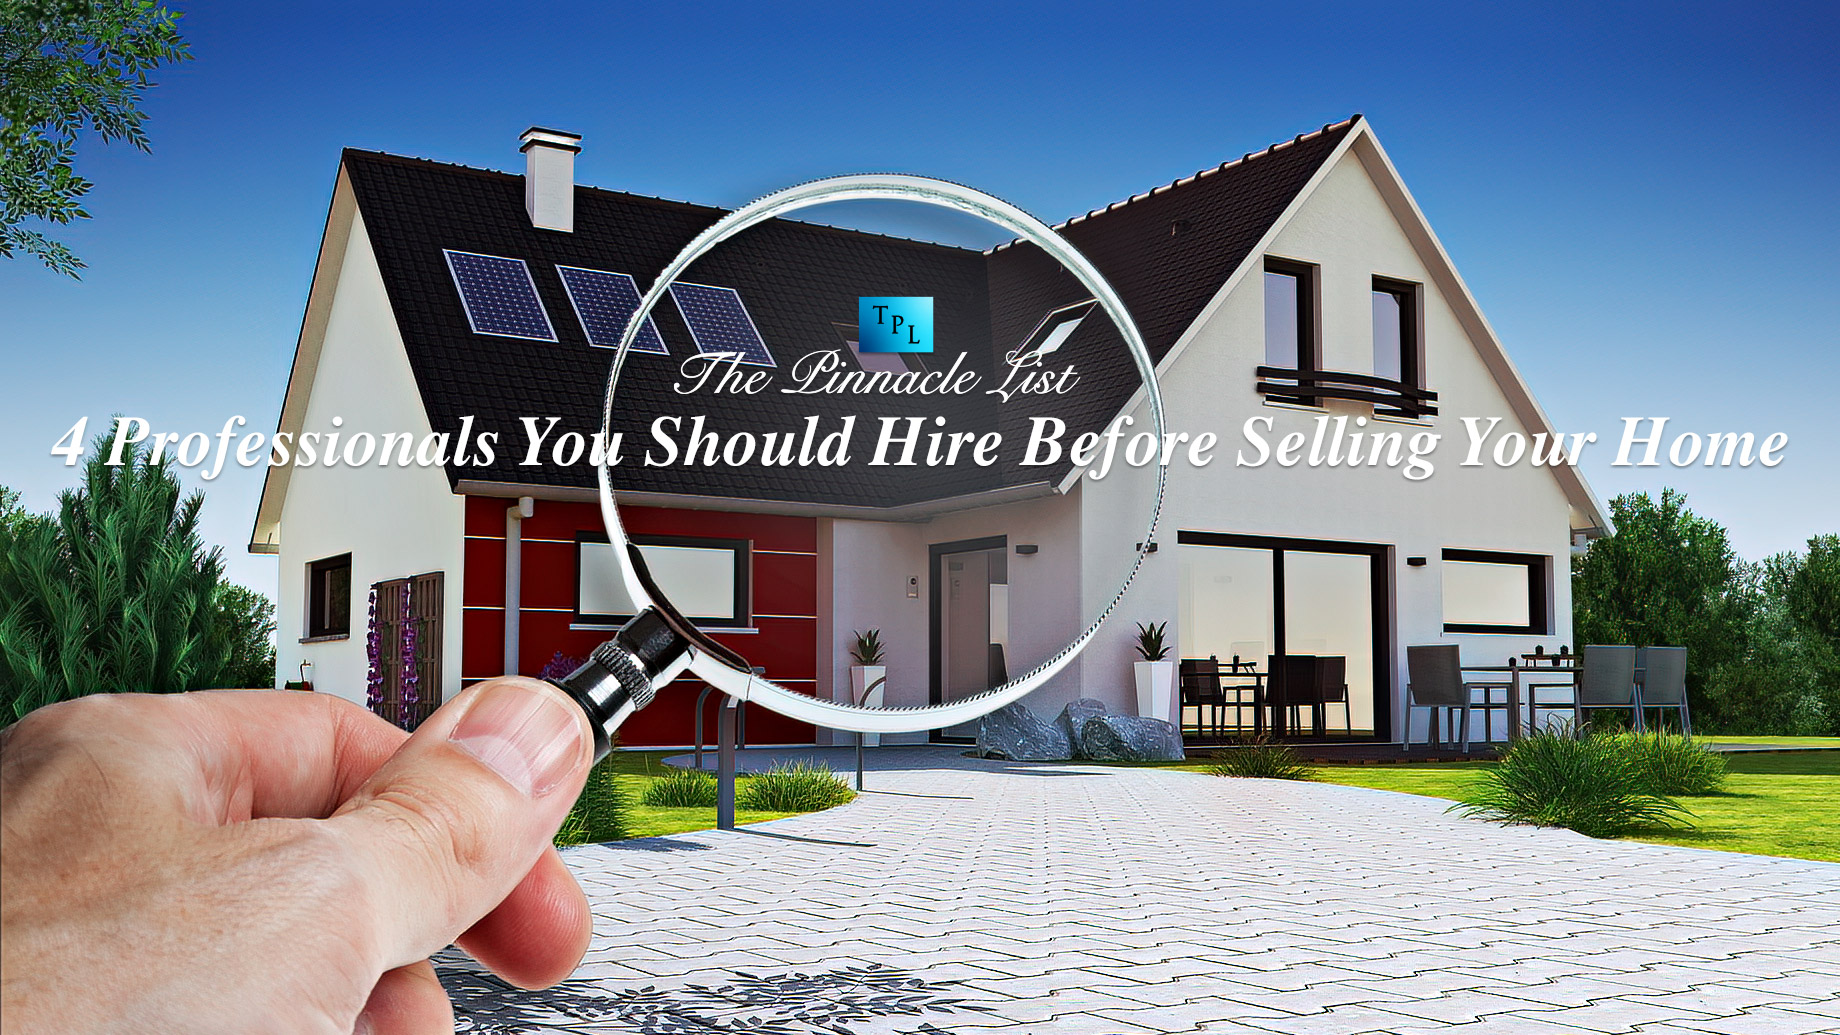 4 Professionals You Should Hire Before Selling Your Home